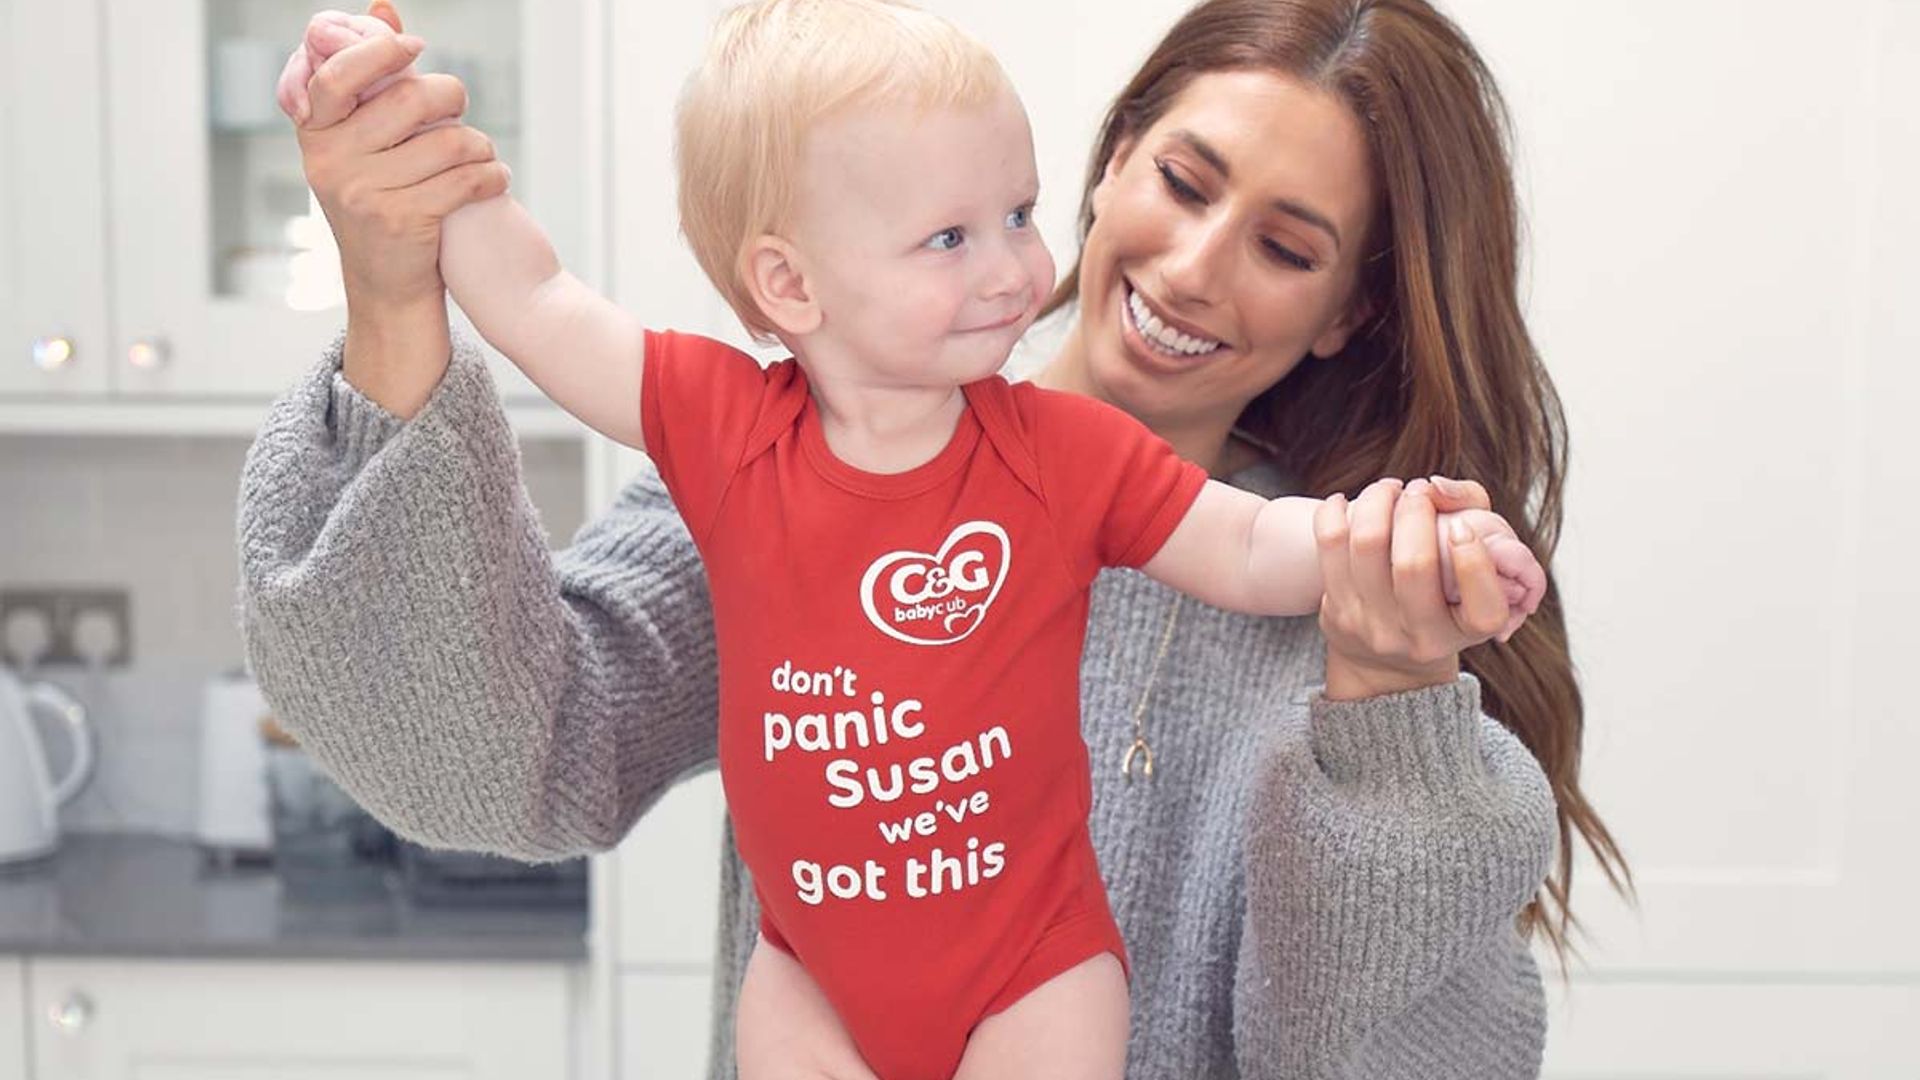 Stacey Solomon shares heartbreaking reality of how mum-shaming affects her